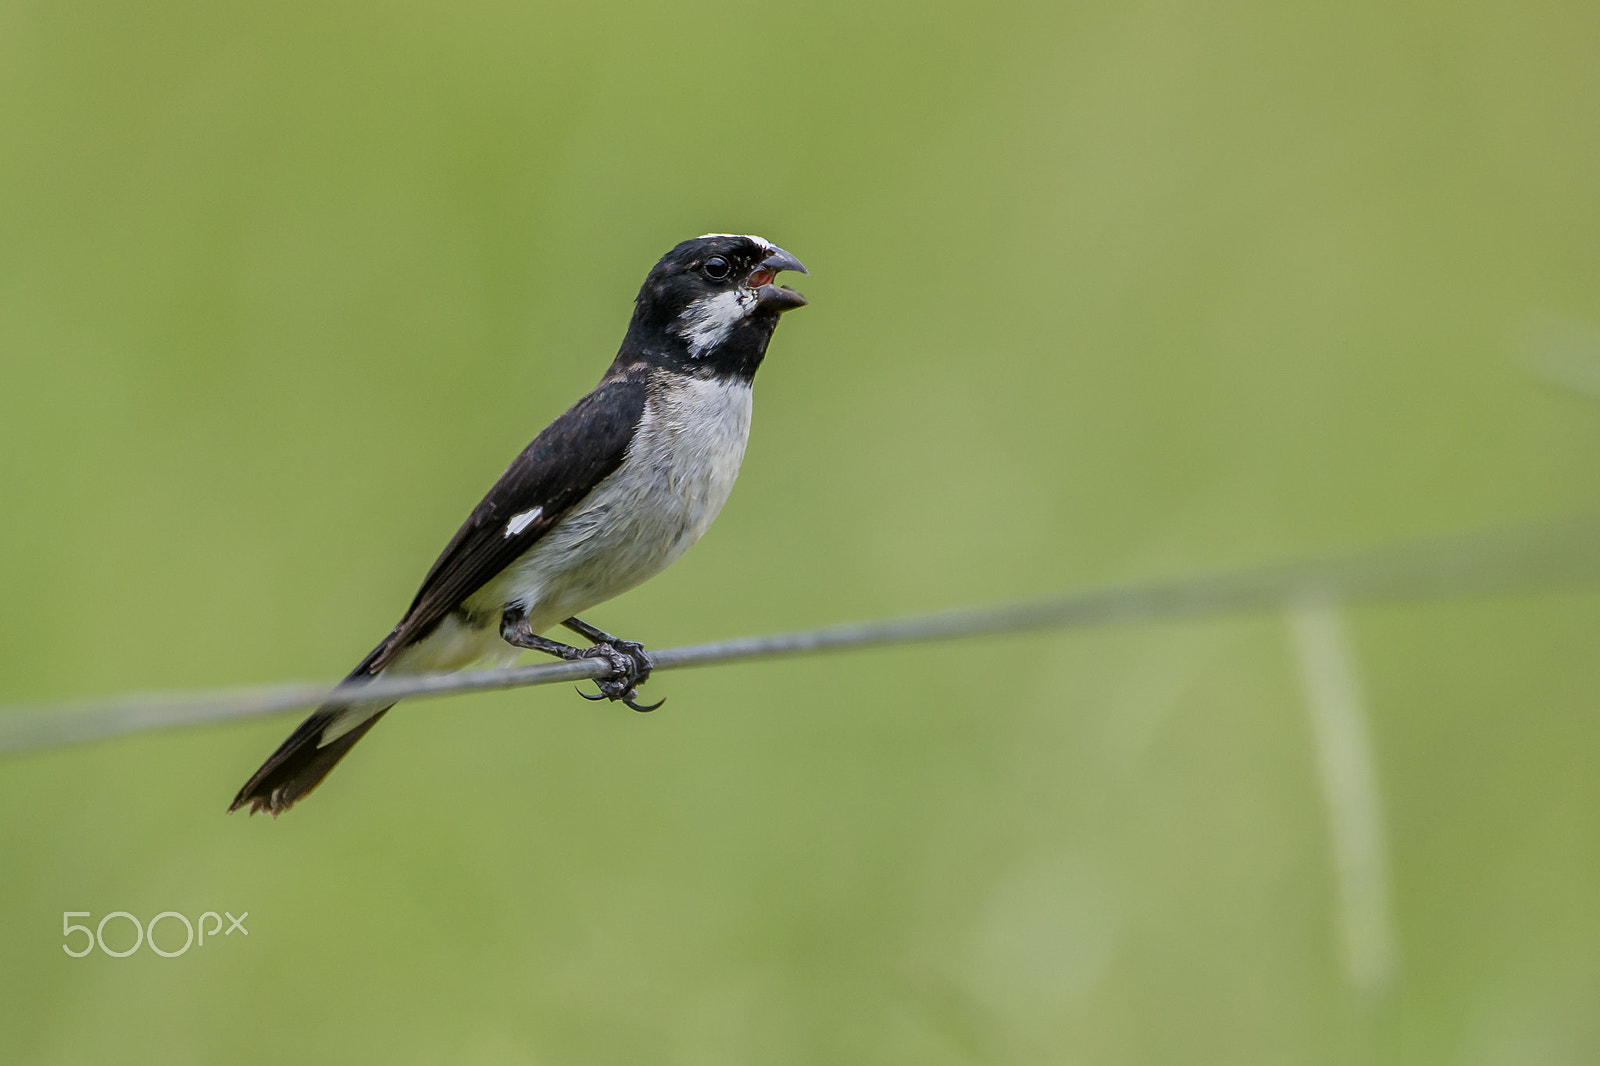 Nikon D800 + Sigma 150-600mm F5-6.3 DG OS HSM | C sample photo. Lined seedeater photography